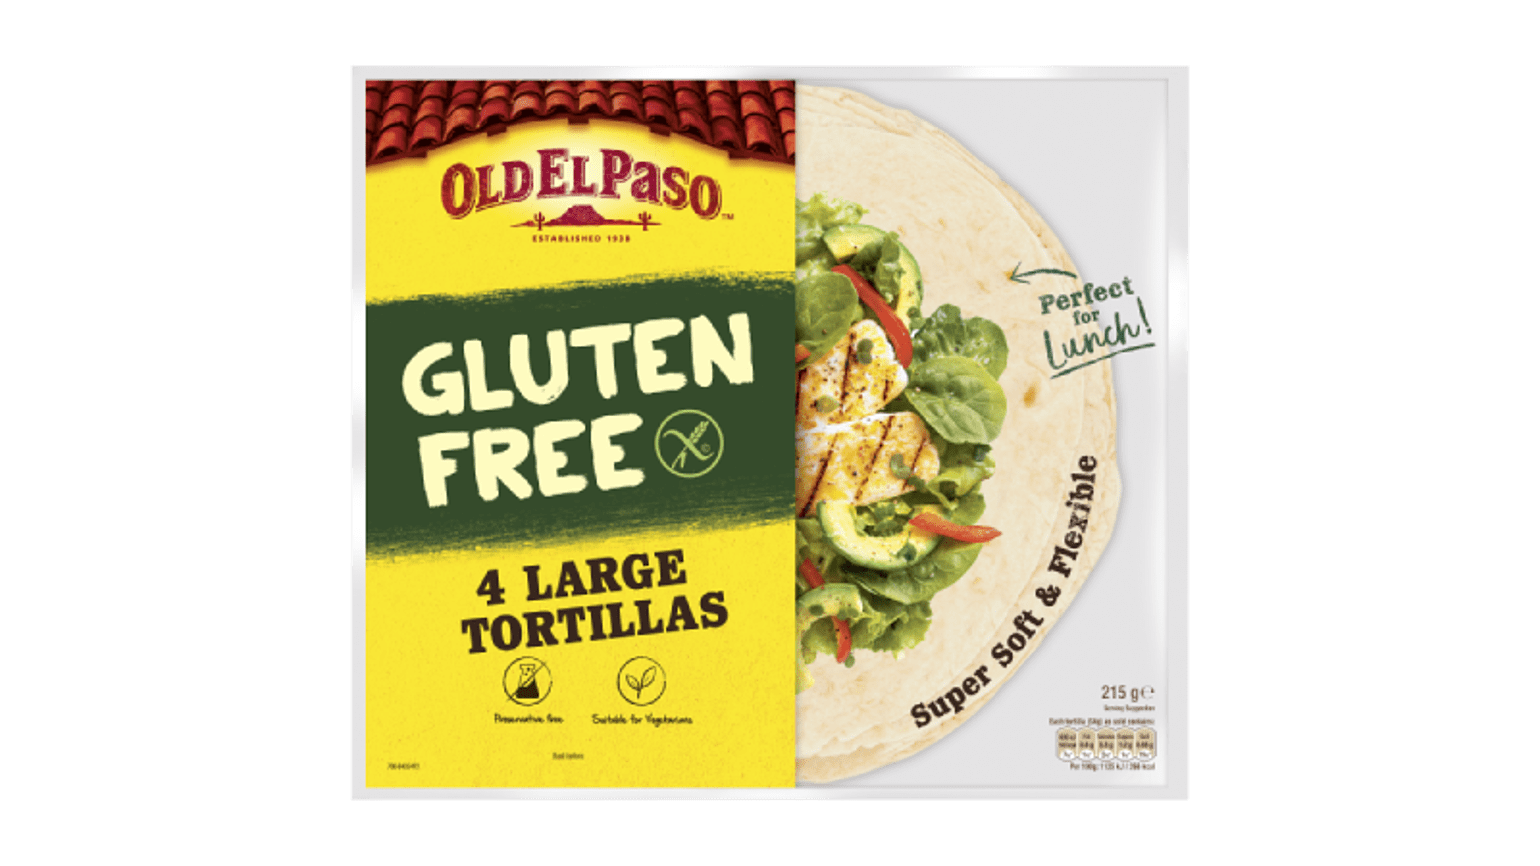 pack of Old El Paso's gluten free 4 large tortillas (215g)